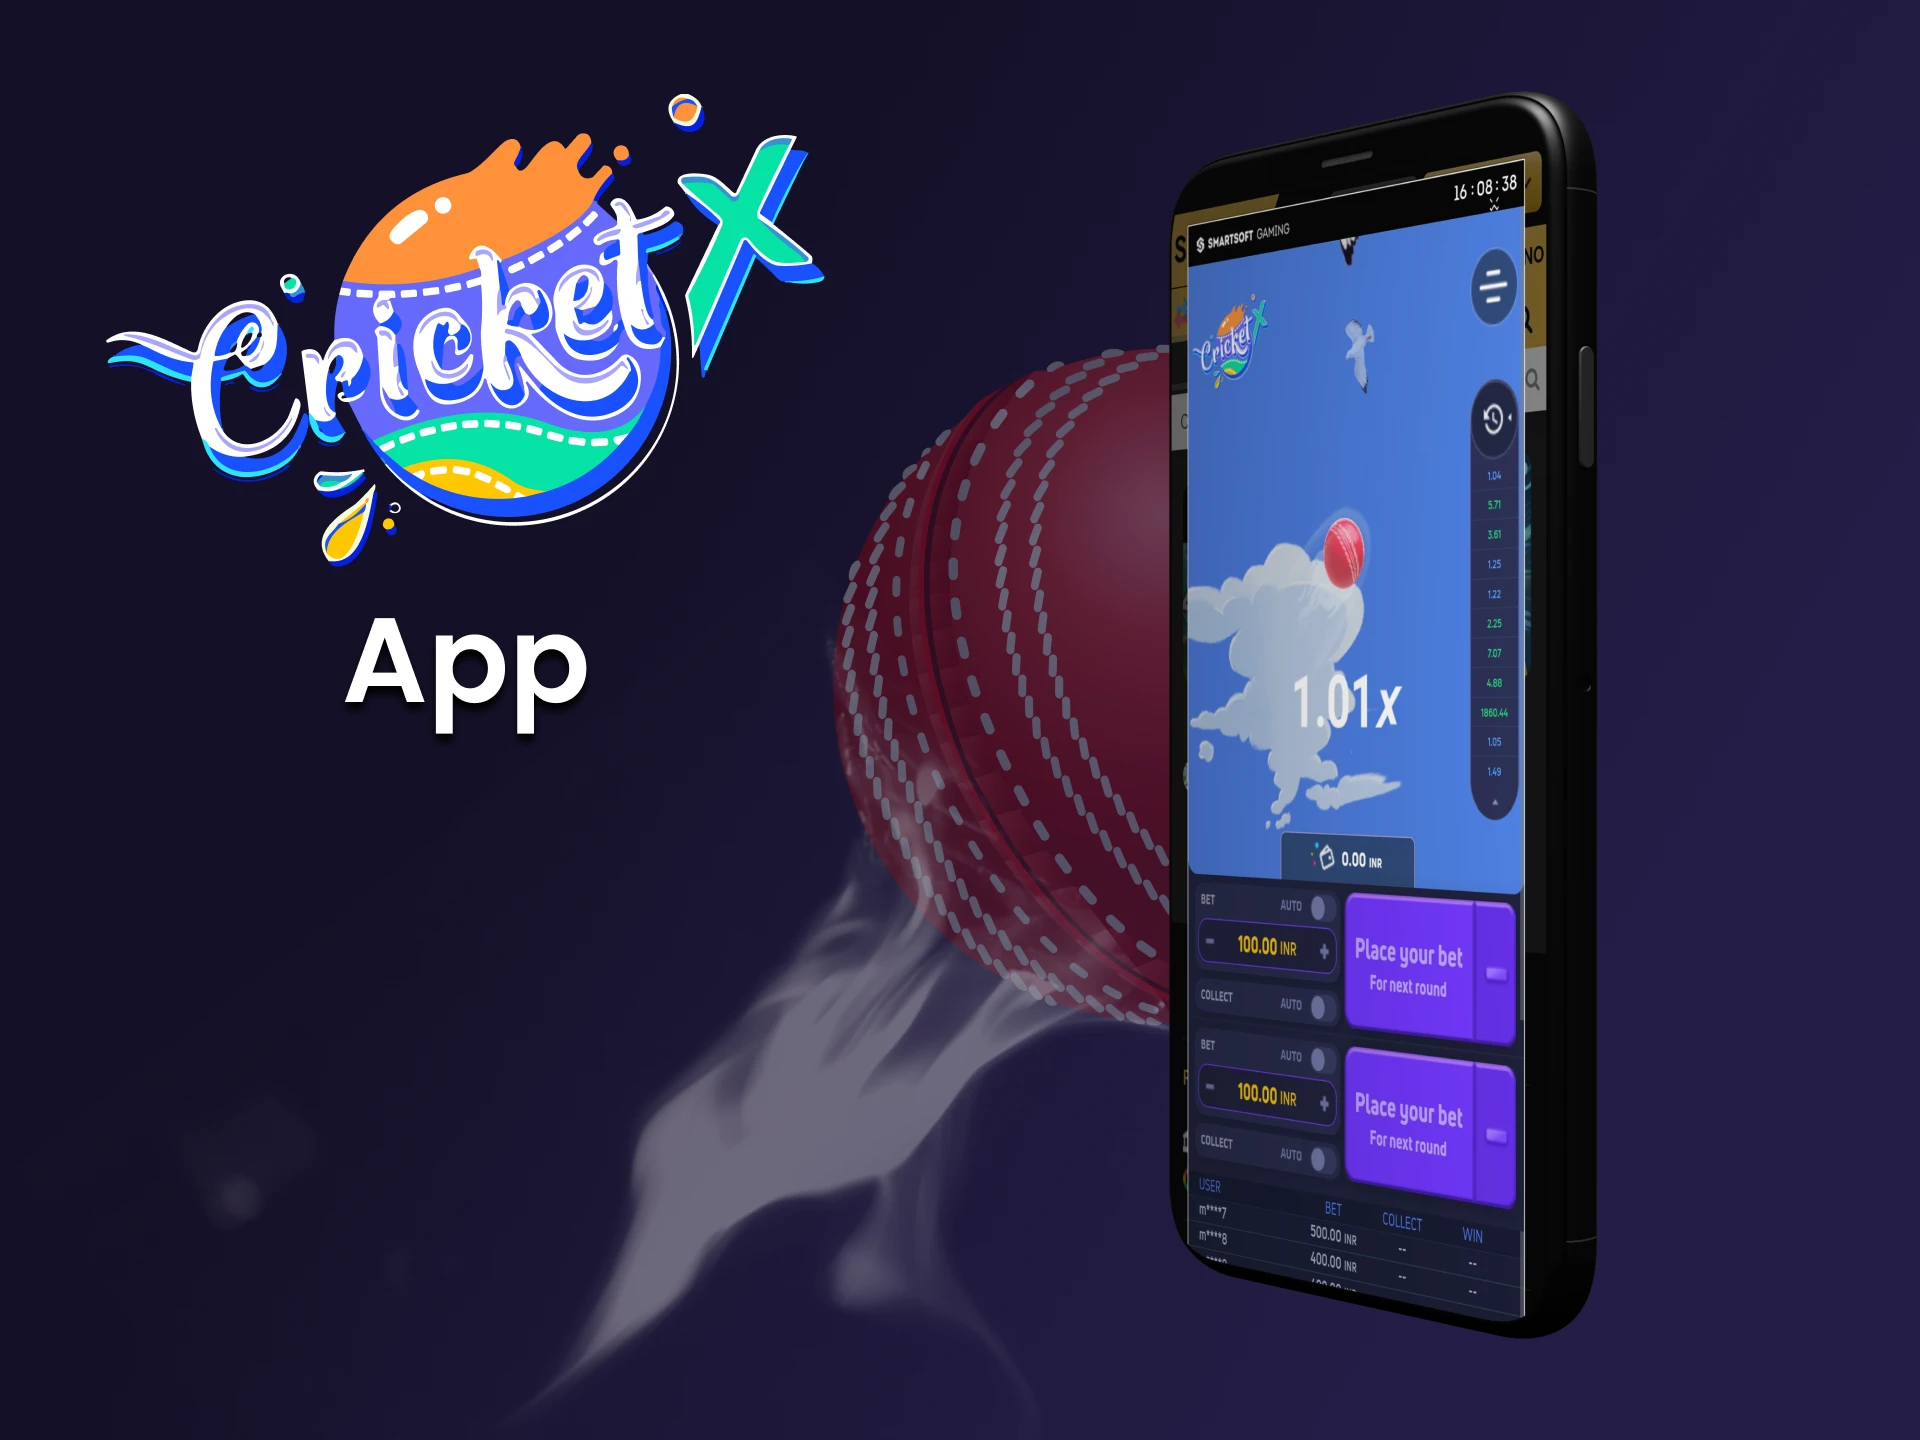 To play Cricket X, use the mobile application.